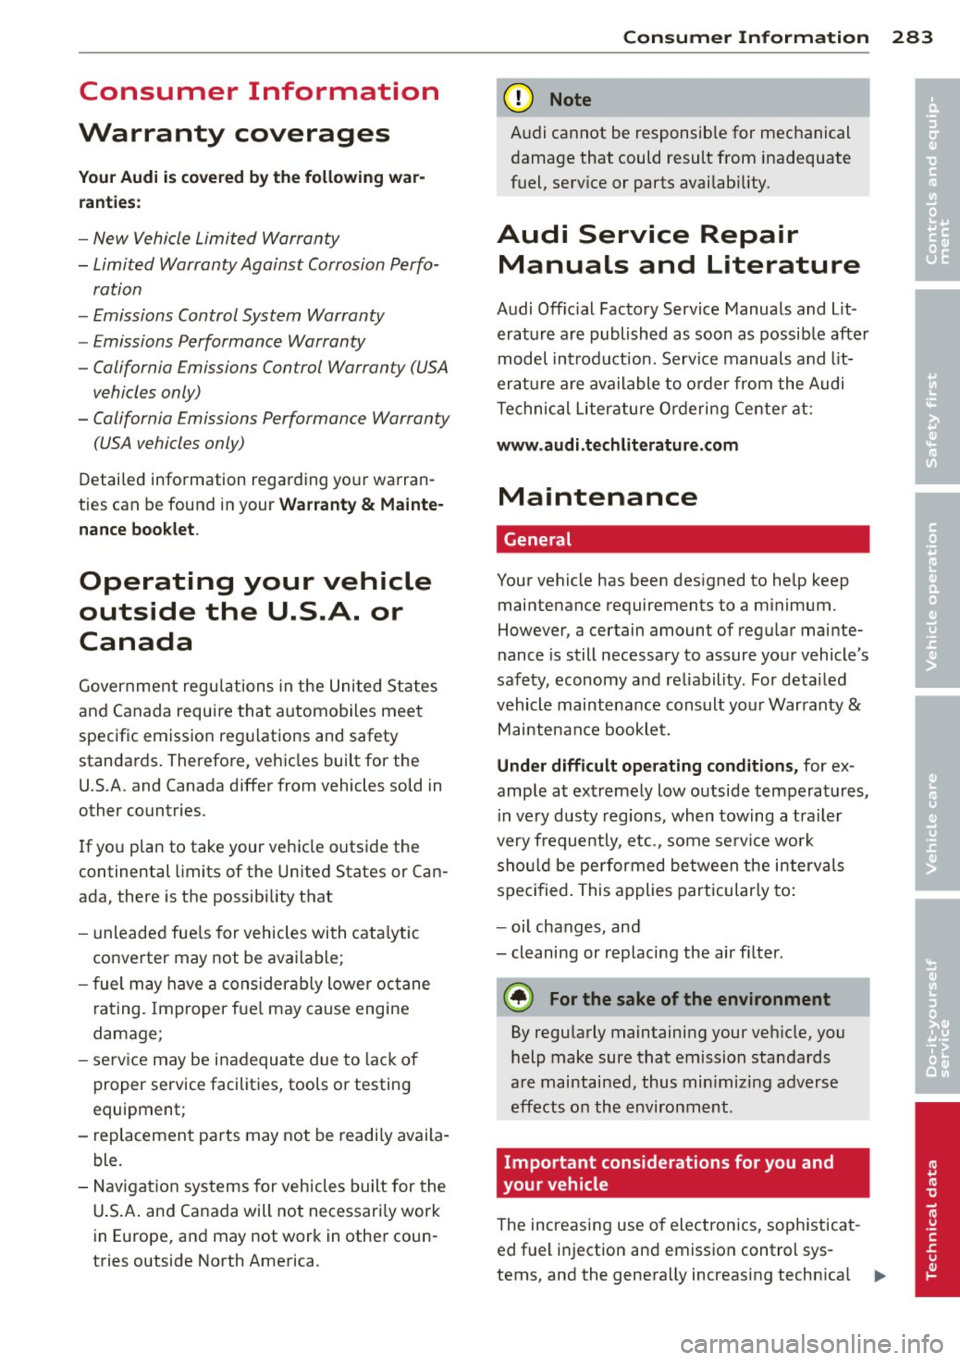 AUDI S8 2011  Owners Manual Consumer  Information 
Warranty  coverages 
Your Audi  is  covered by the  following  war­
ranties : 
- New  Vehicle  Limited  Warranty 
- Limited  Warranty  Against  Corrosion  Perfo-
ration 
- Emis